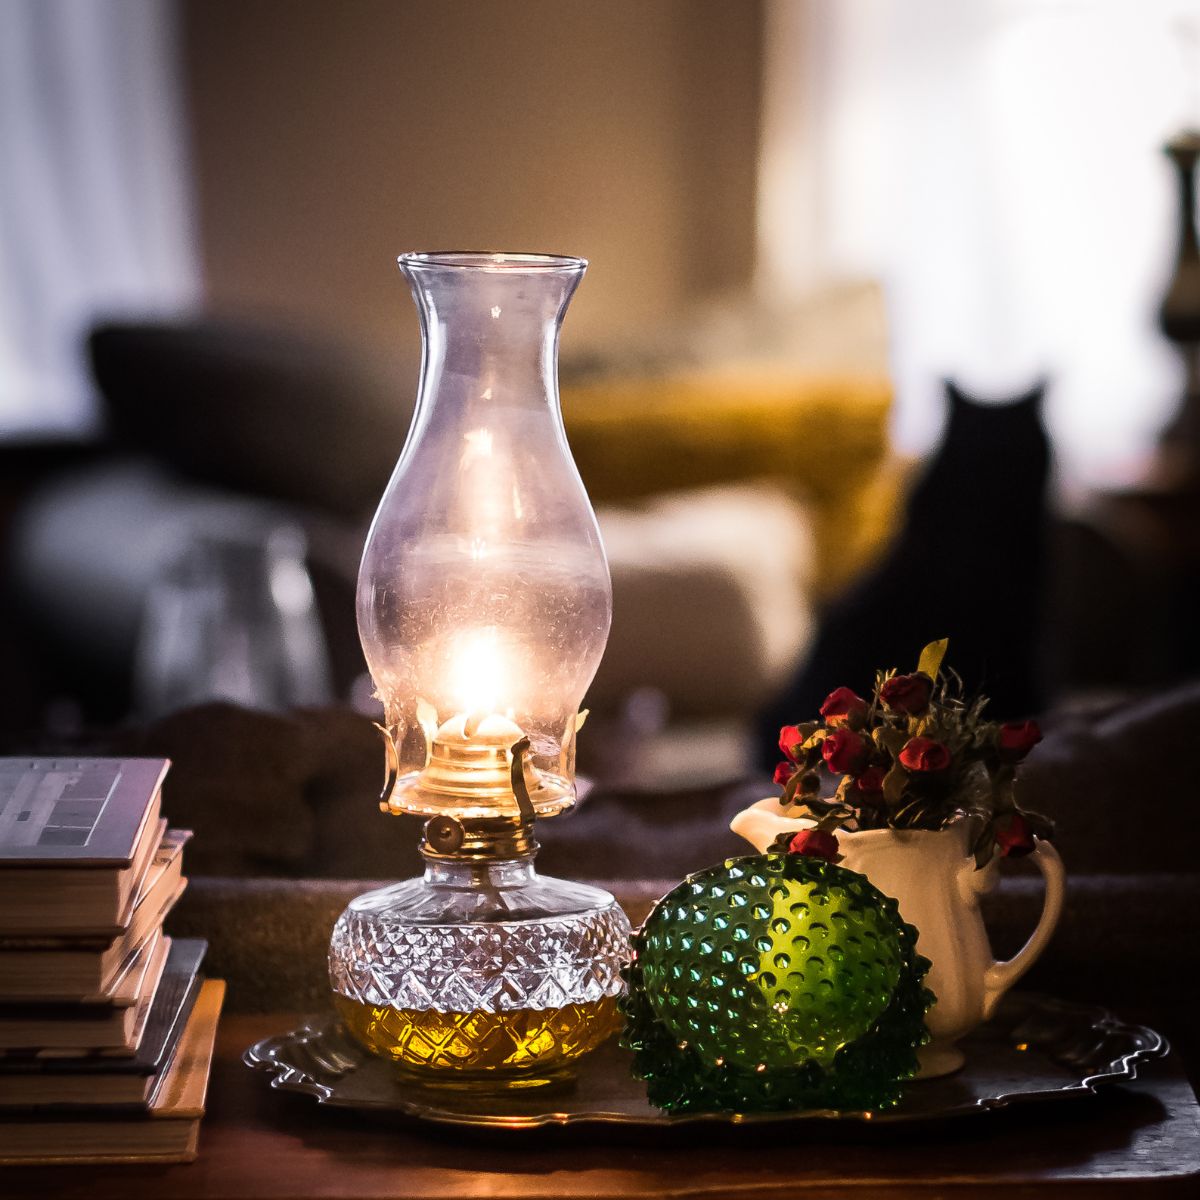 How to Decorate with Oil Lamps